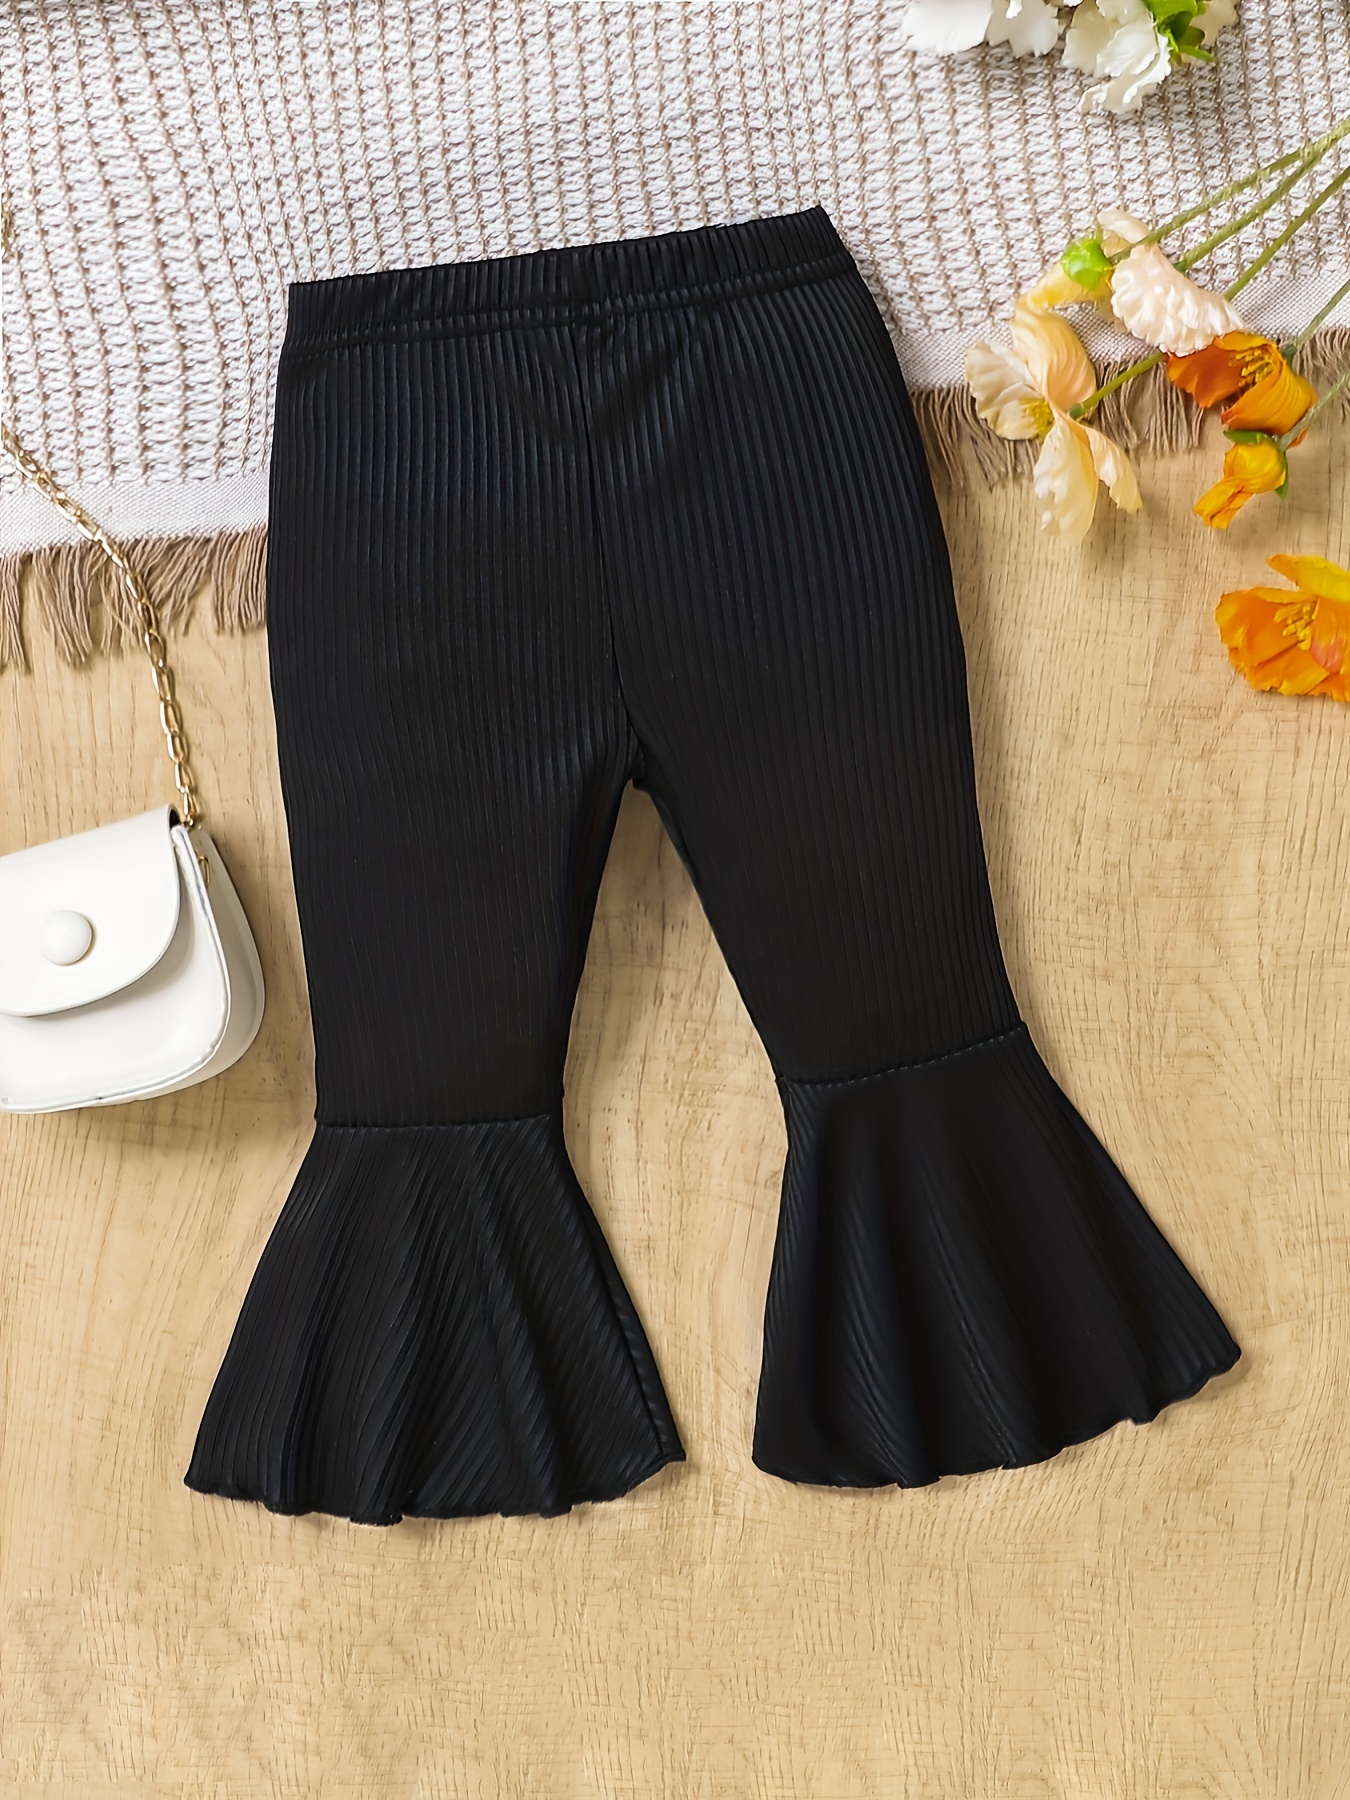 Buy Black Trousers & Pants for Girls by Tiny Girl Online